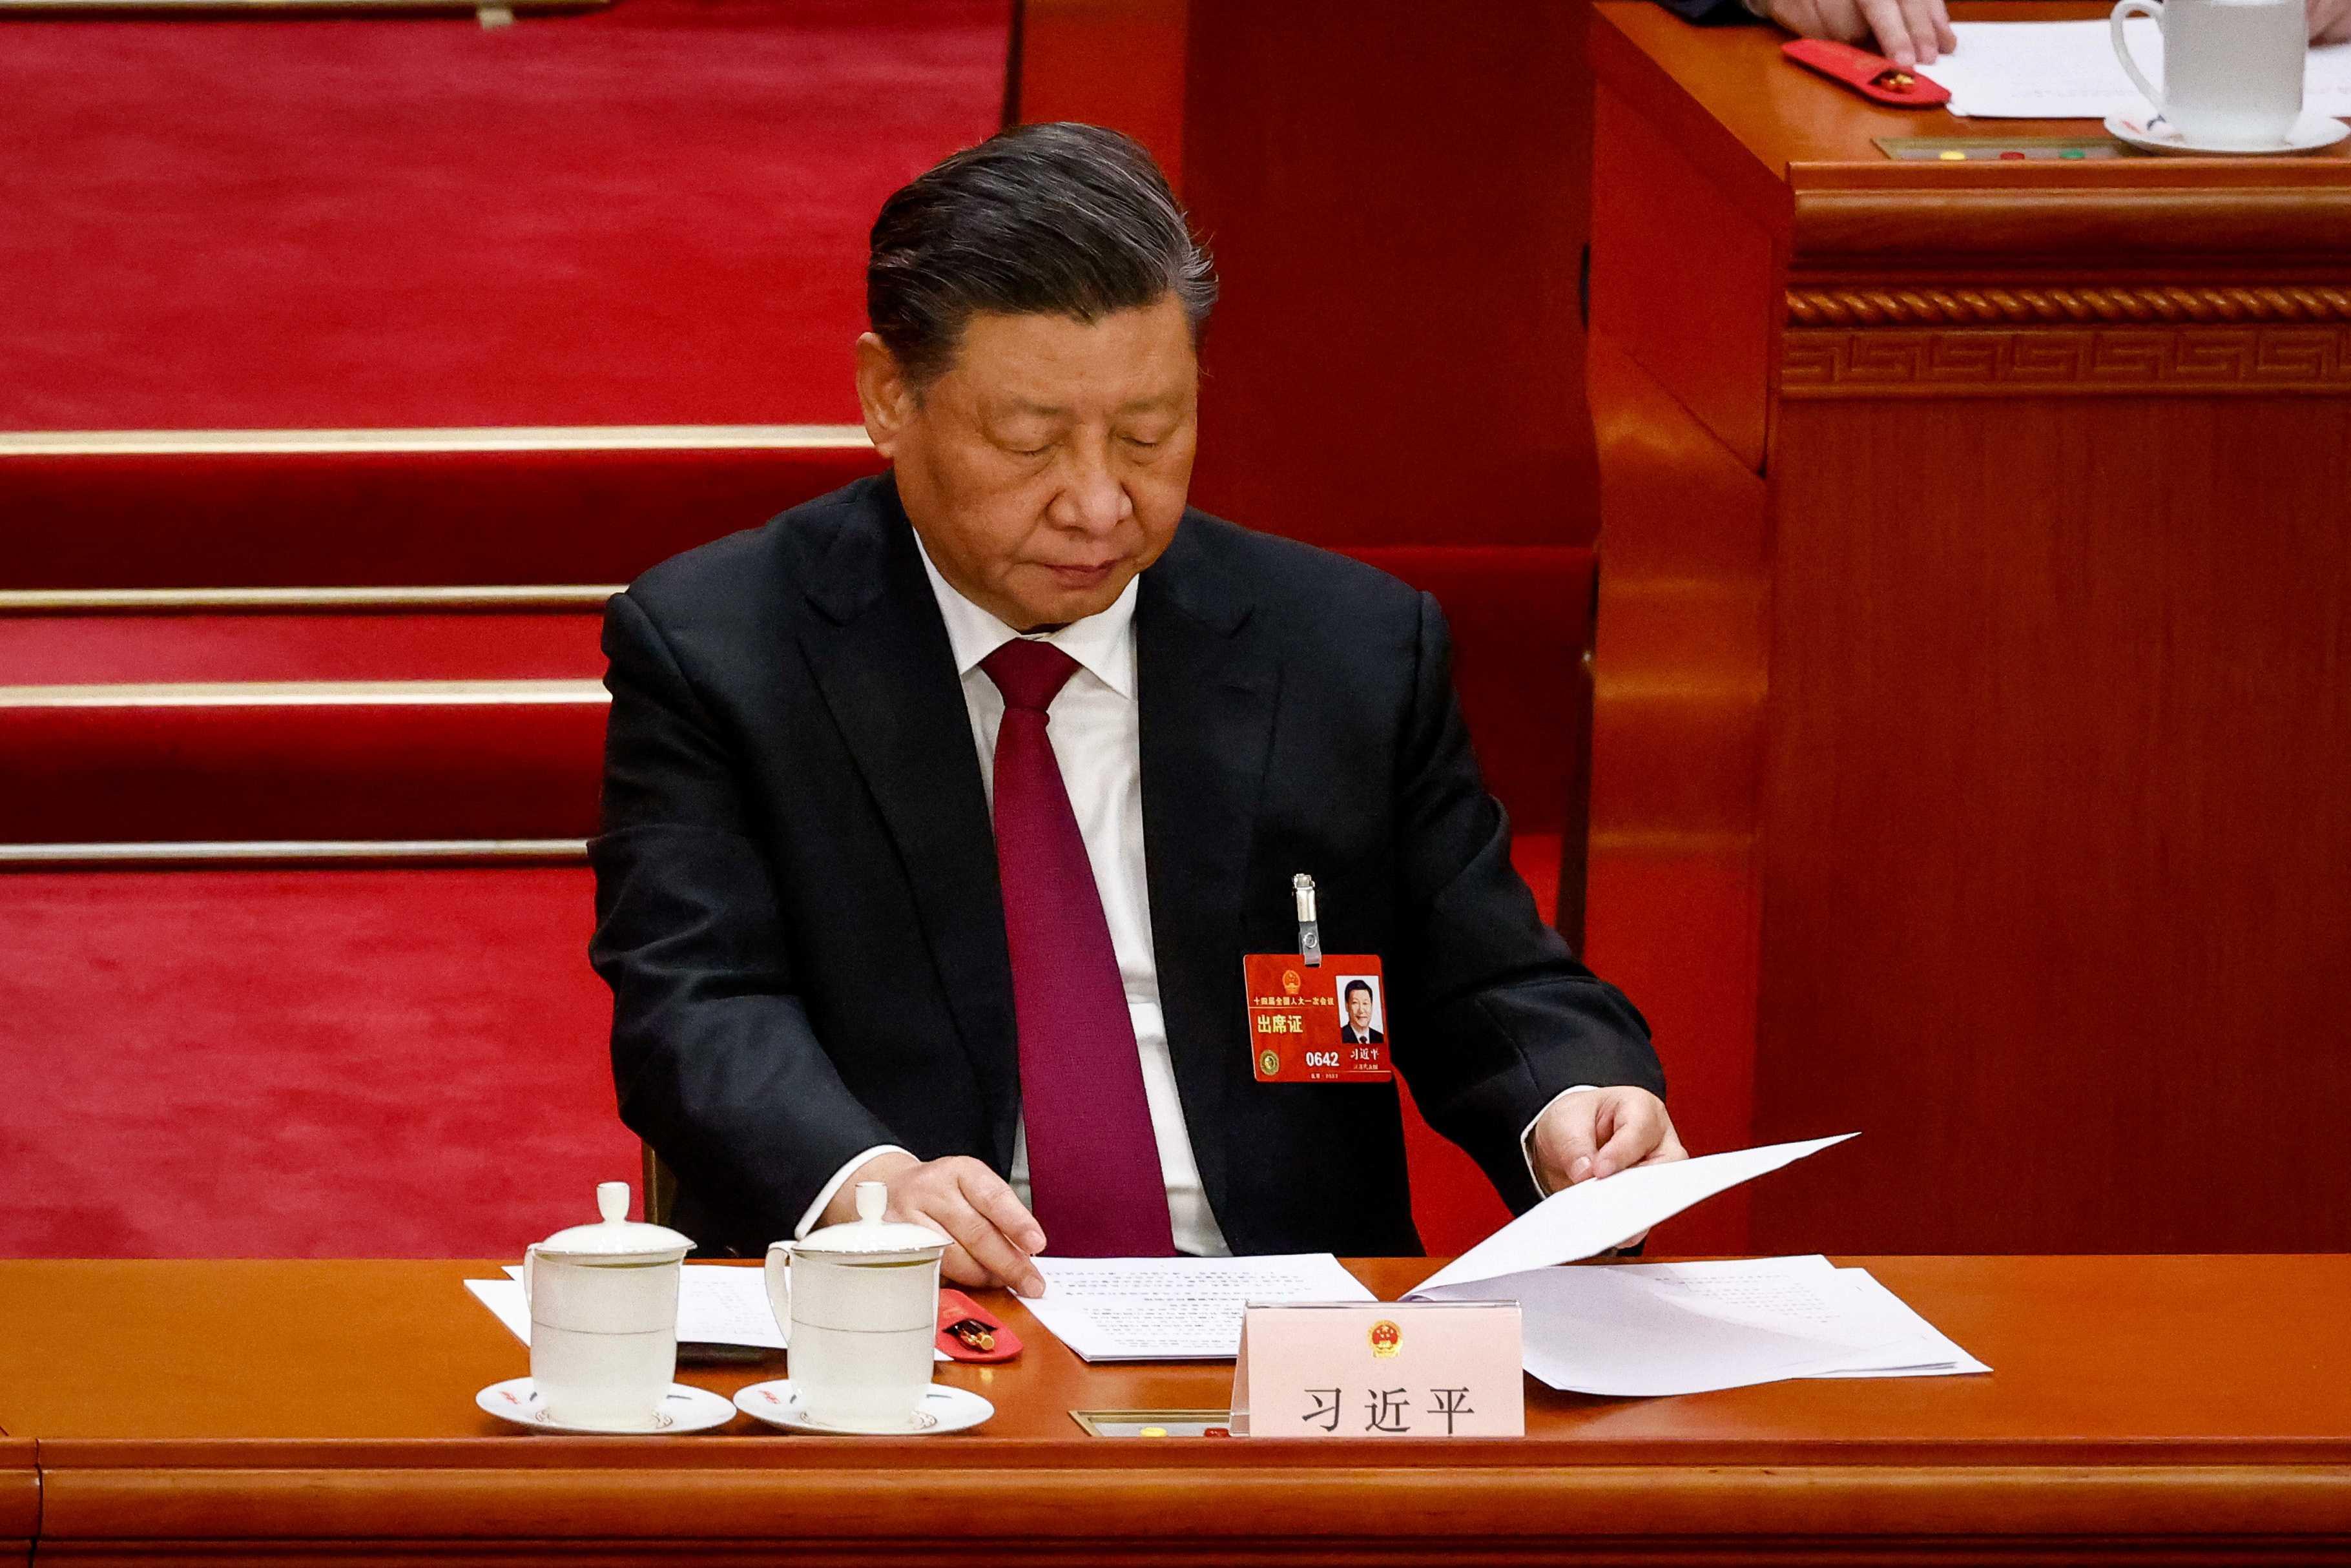 Chinese President Xi Jinping attends the Third Plenary Session of the National People's Congress (NPC) at the Great Hall of the People, in Beijing, China, 10 March. Photo: Reuters